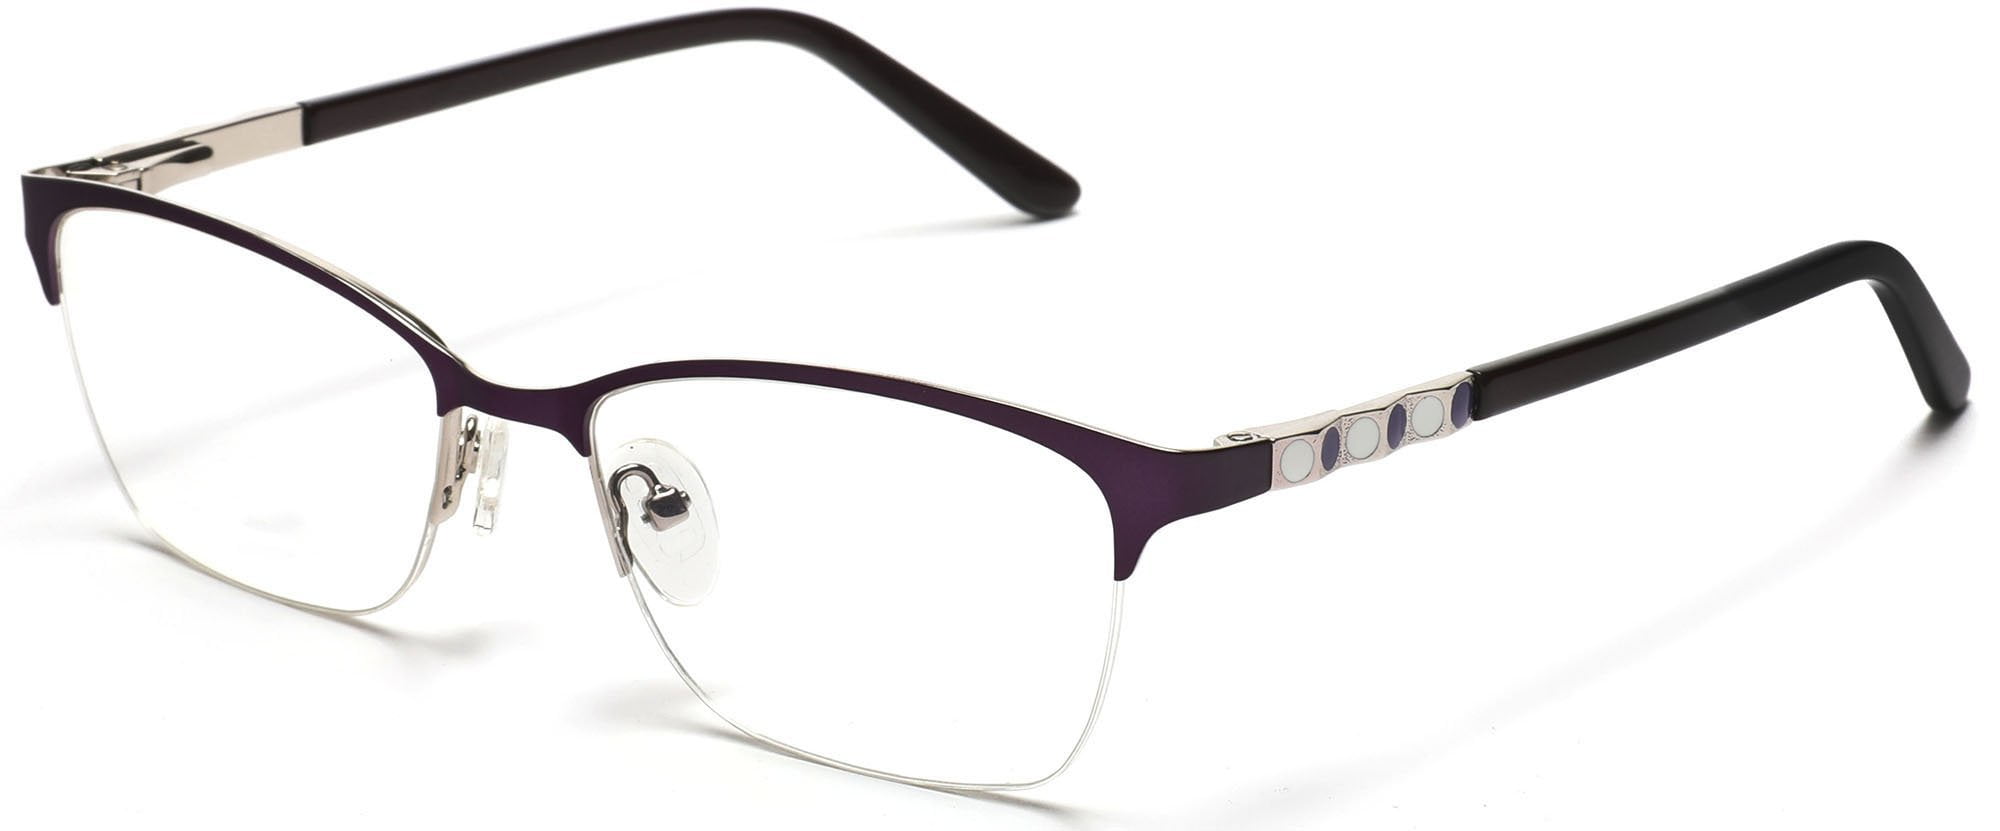 Tango Optics Cateye Metal Eyeglasses Frame Luxe Rx Stainless Helen Brooke Taussig Purple For